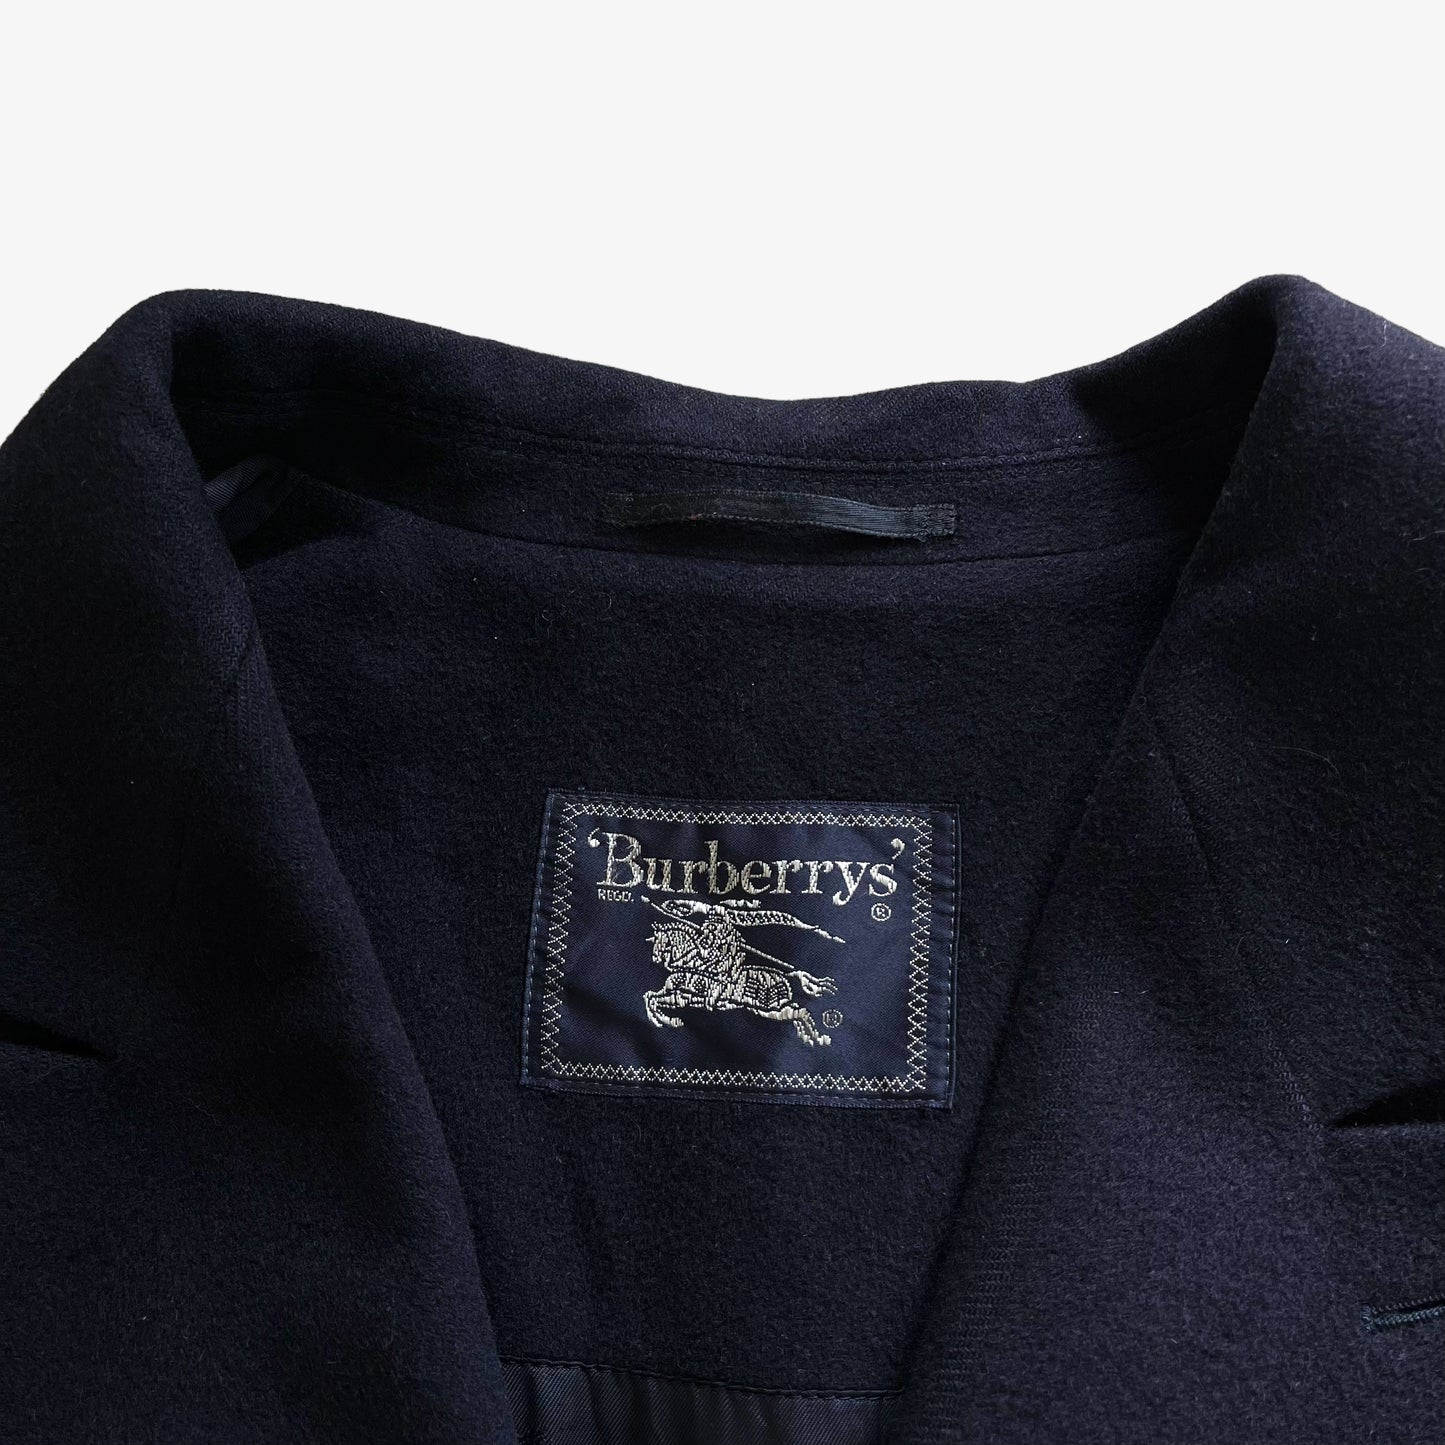 Vintage 80s Burberry Double Breasted Navy Wool Coat Label - Casspios Dream